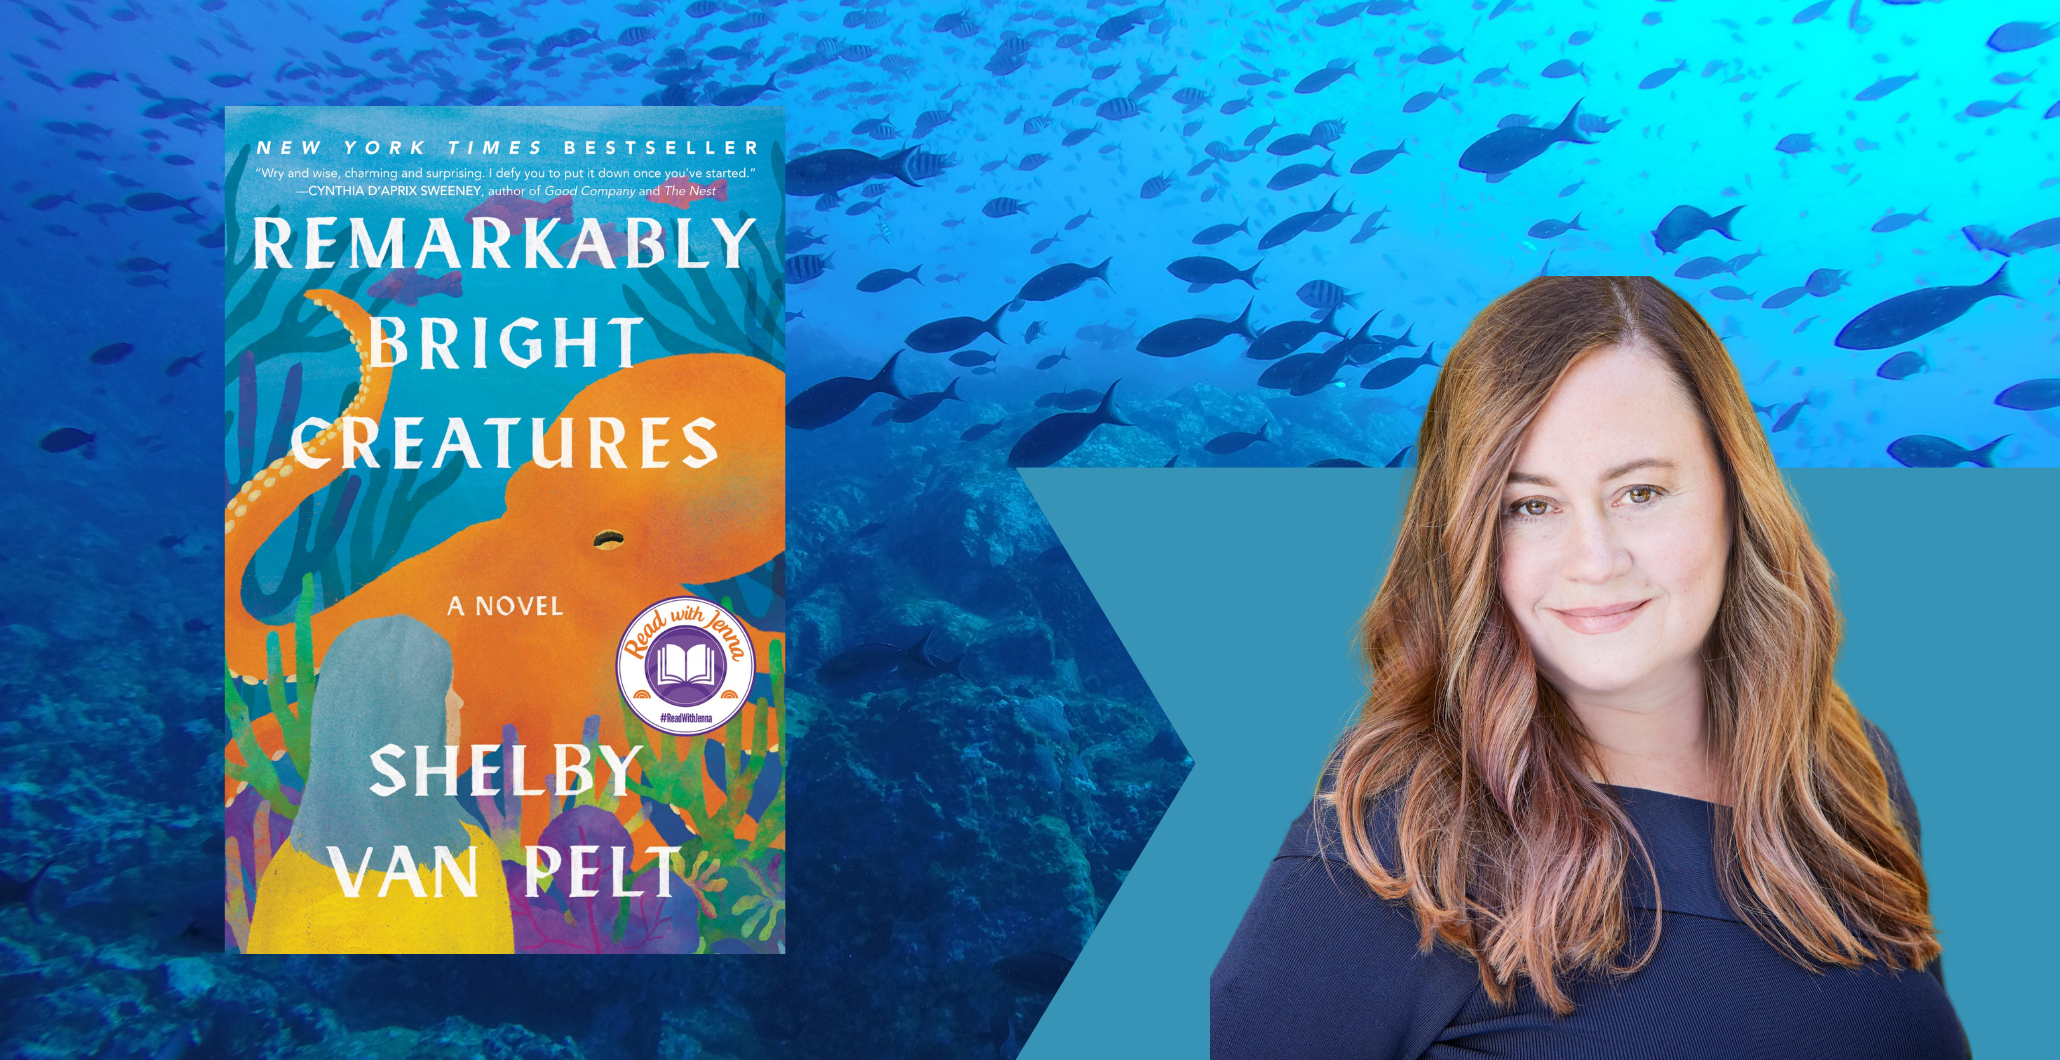 An Exploration of Friendship, Reckoning, and Hope with Novelist Shelby Van Pelt